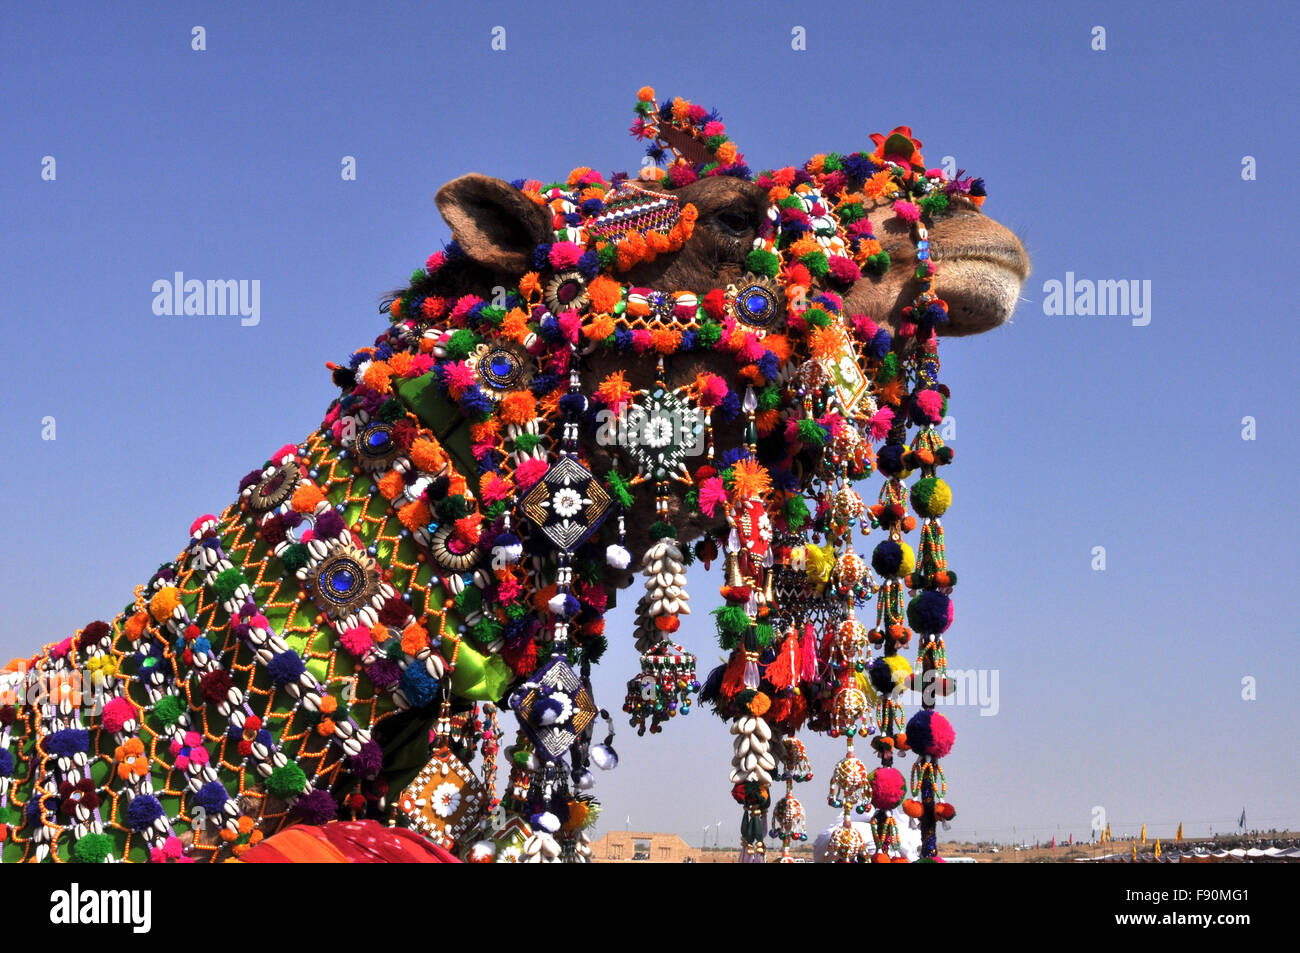 Beautifully Decorated Camel for best decorated camel competition during Jaisalmer Desert Festival at Jaisalmer Rajasthan, India. Stock Photo